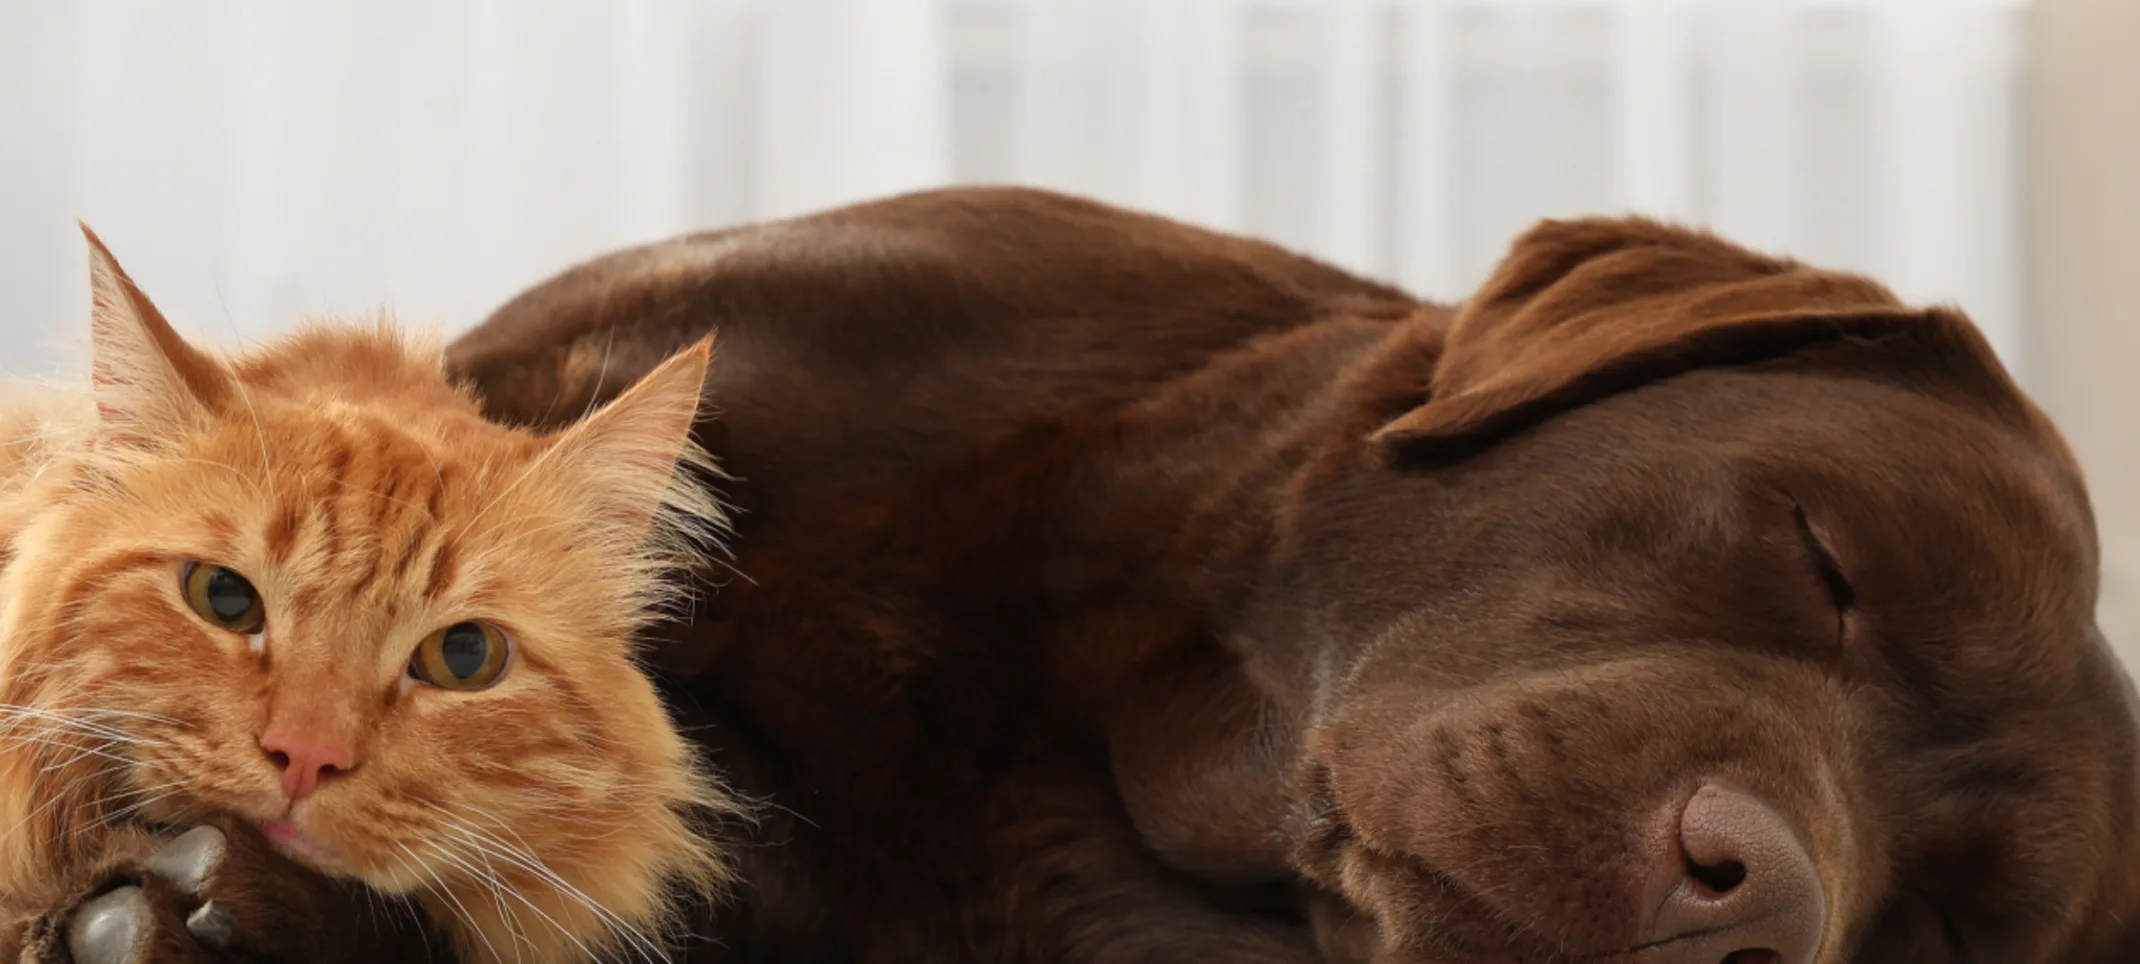 An Orange Tabby cat and a Brown Labrador Retriever are resting next to each other.